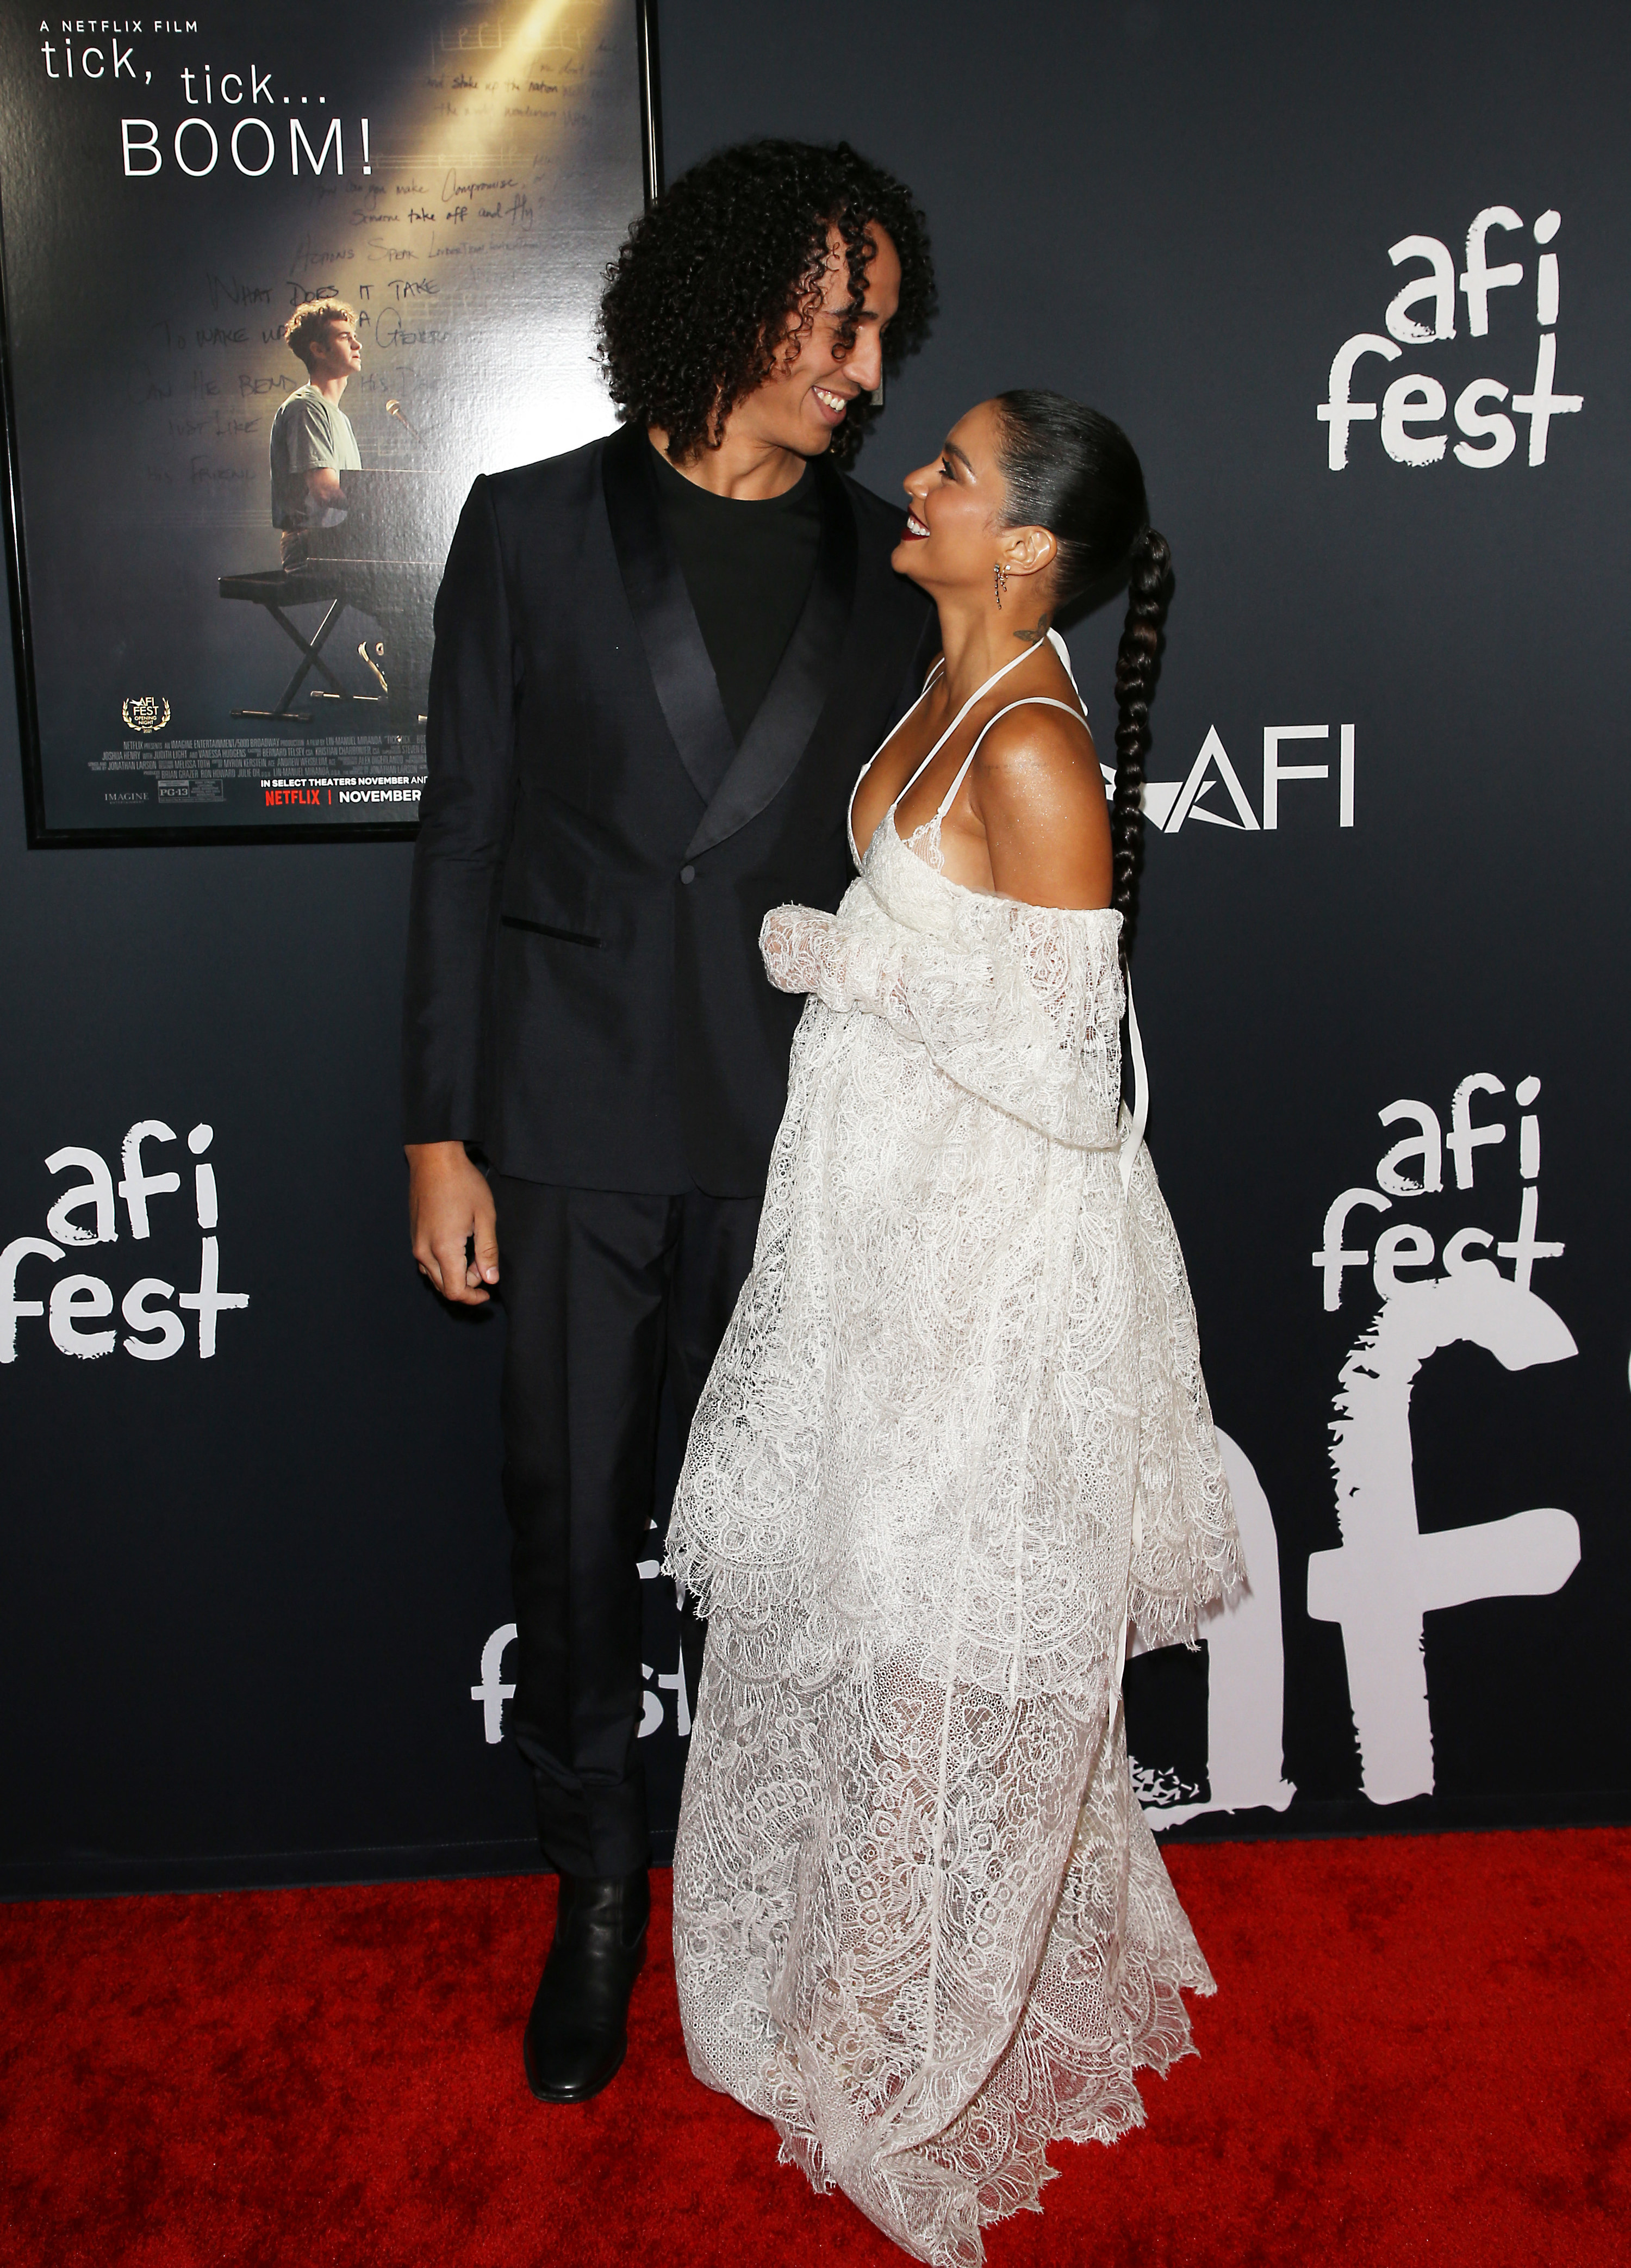 Cole and Vanessa smiling at each other on the red carpet